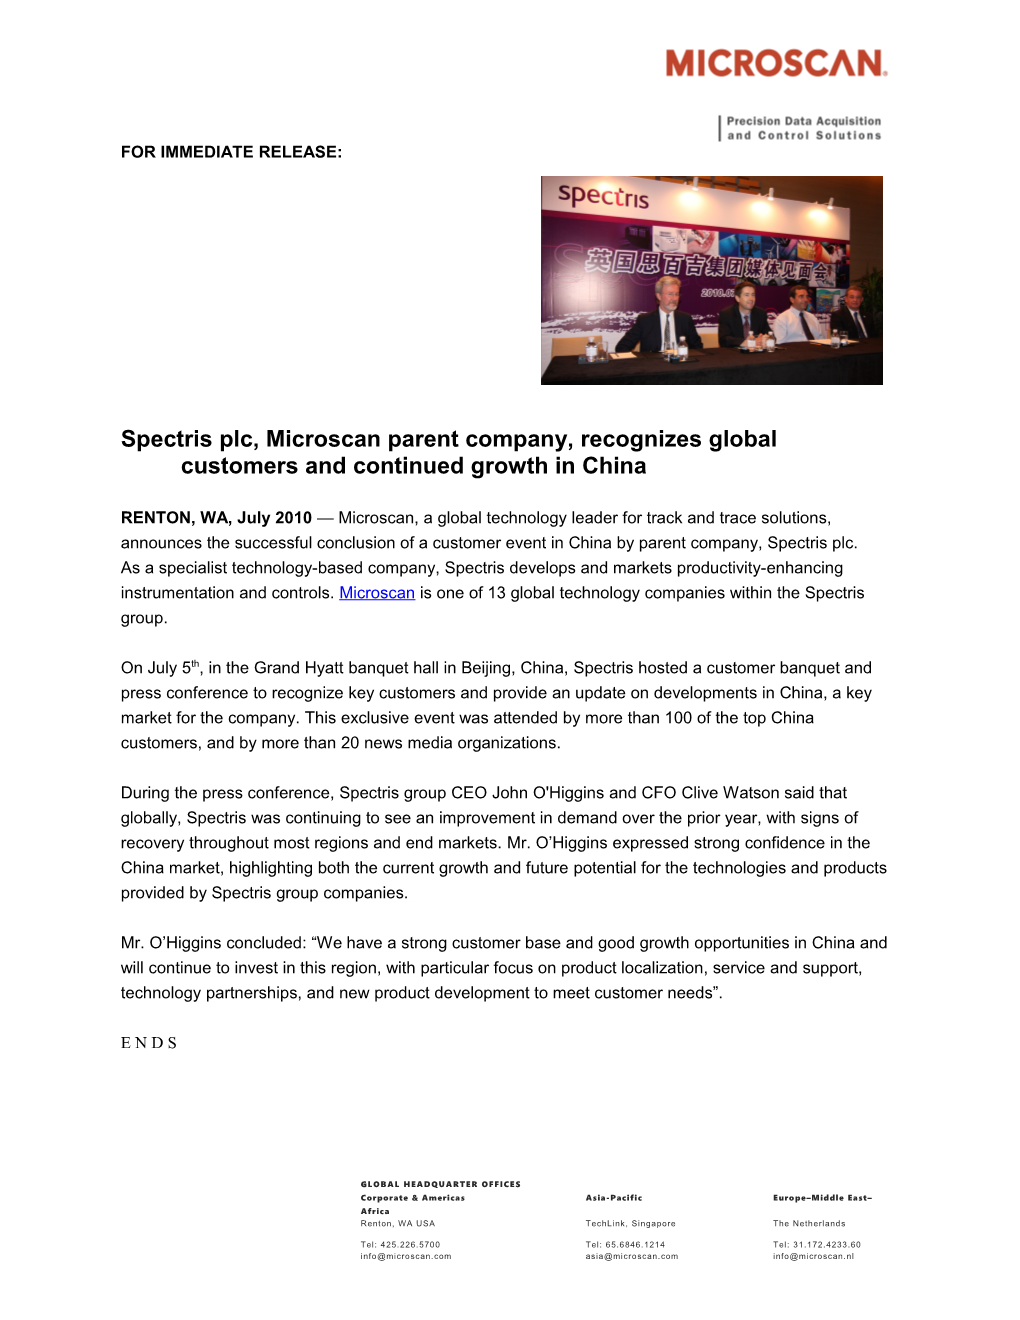 Spectris Plc, Microscan Parent Company, Recognizes Global Customers and Continuedgrowthin China